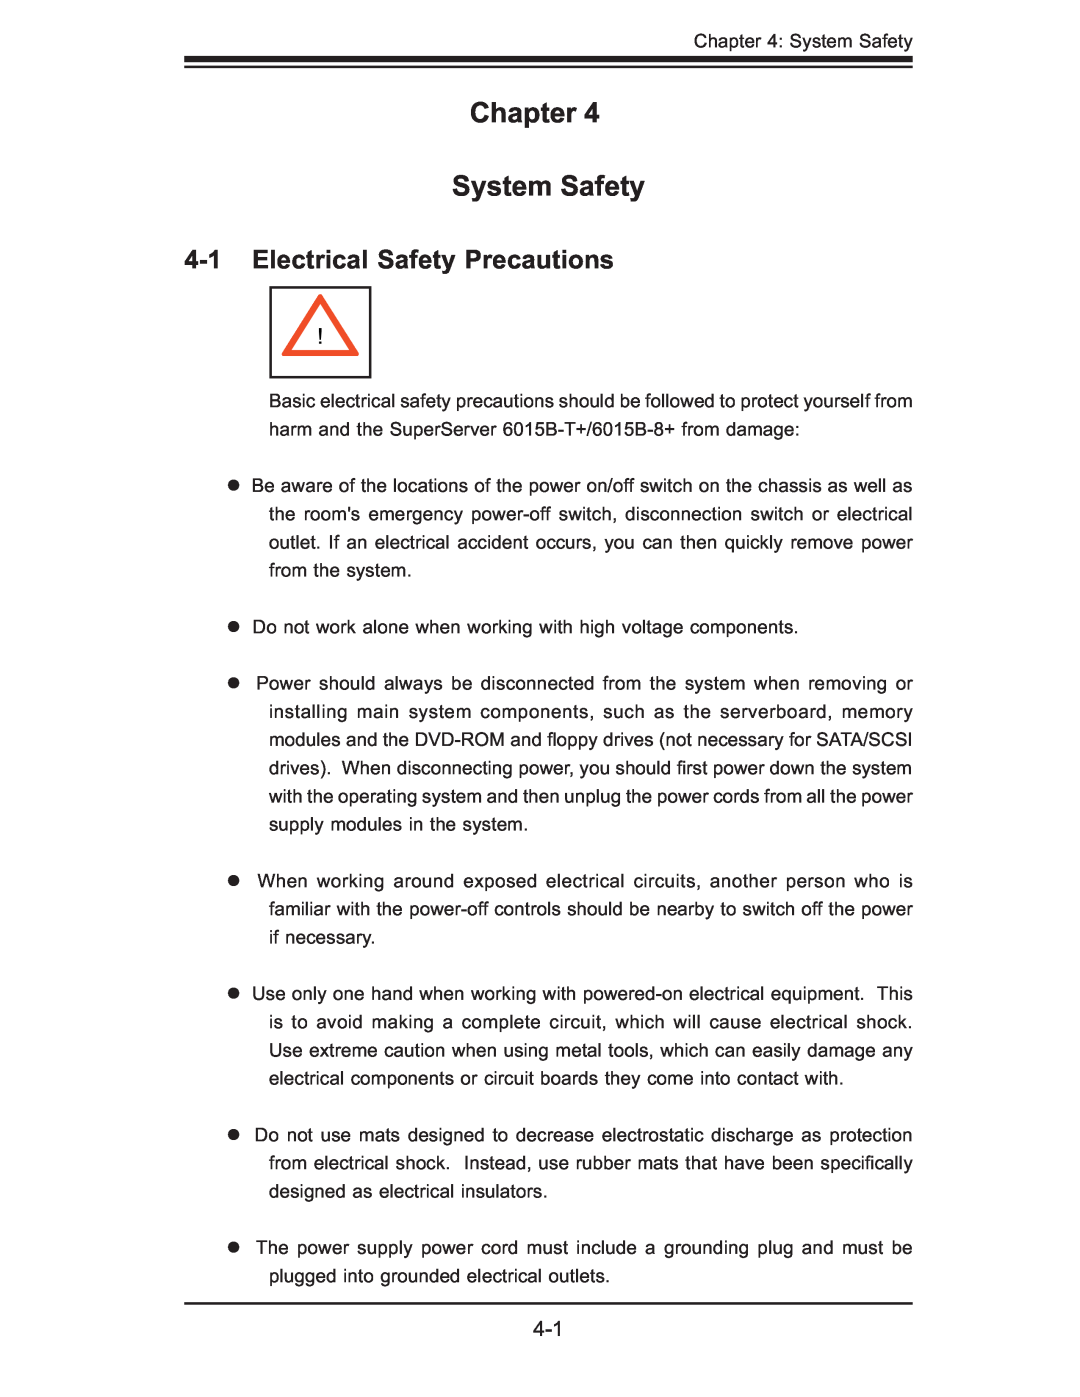 SUPER MICRO Computer 6015B-8+ manual Chapter System Safety, Electrical Safety Precautions 